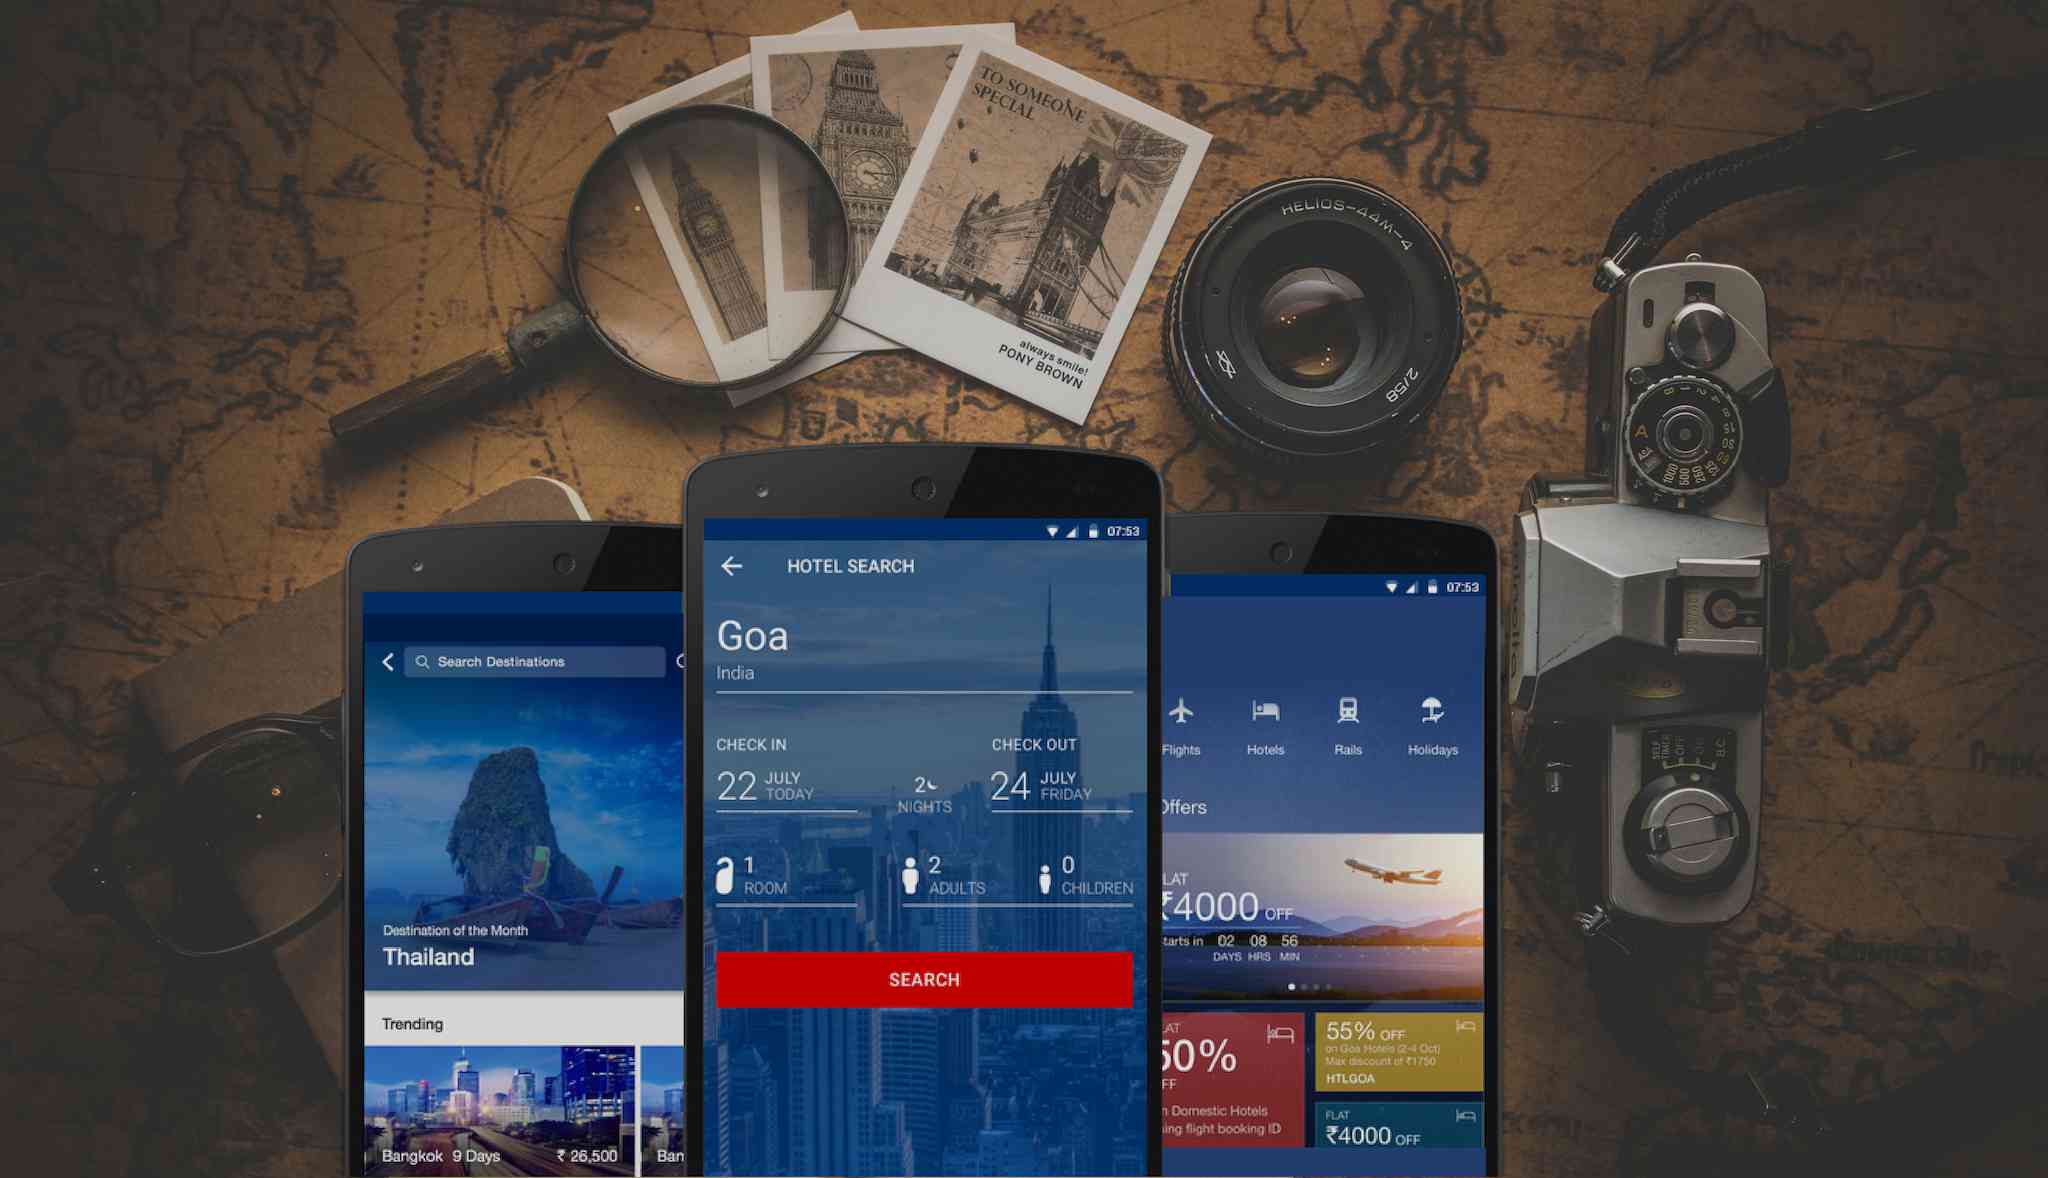 5 best Travel Apps that Every Traveler Should Have in Their Smartphone